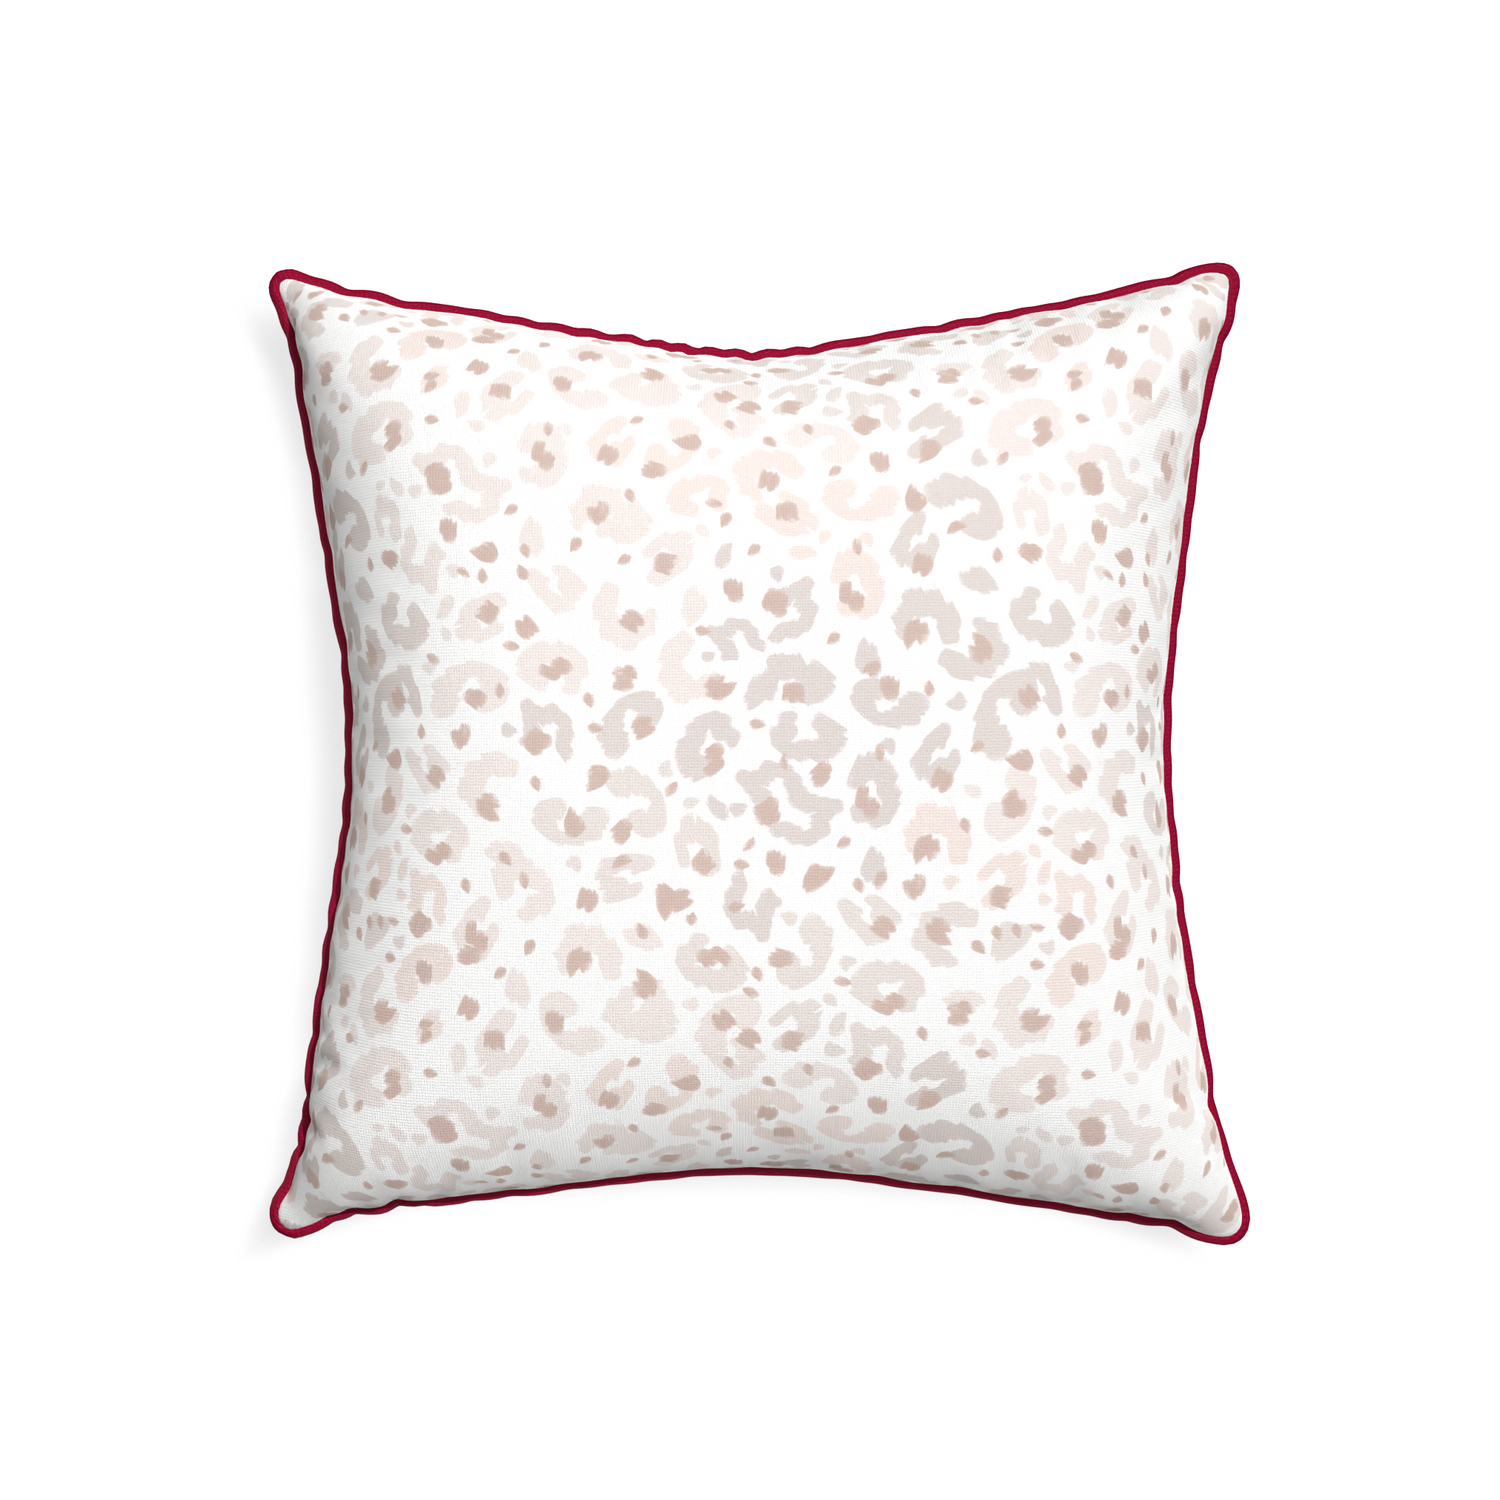 22-square rosie custom beige animal printpillow with raspberry piping on white background